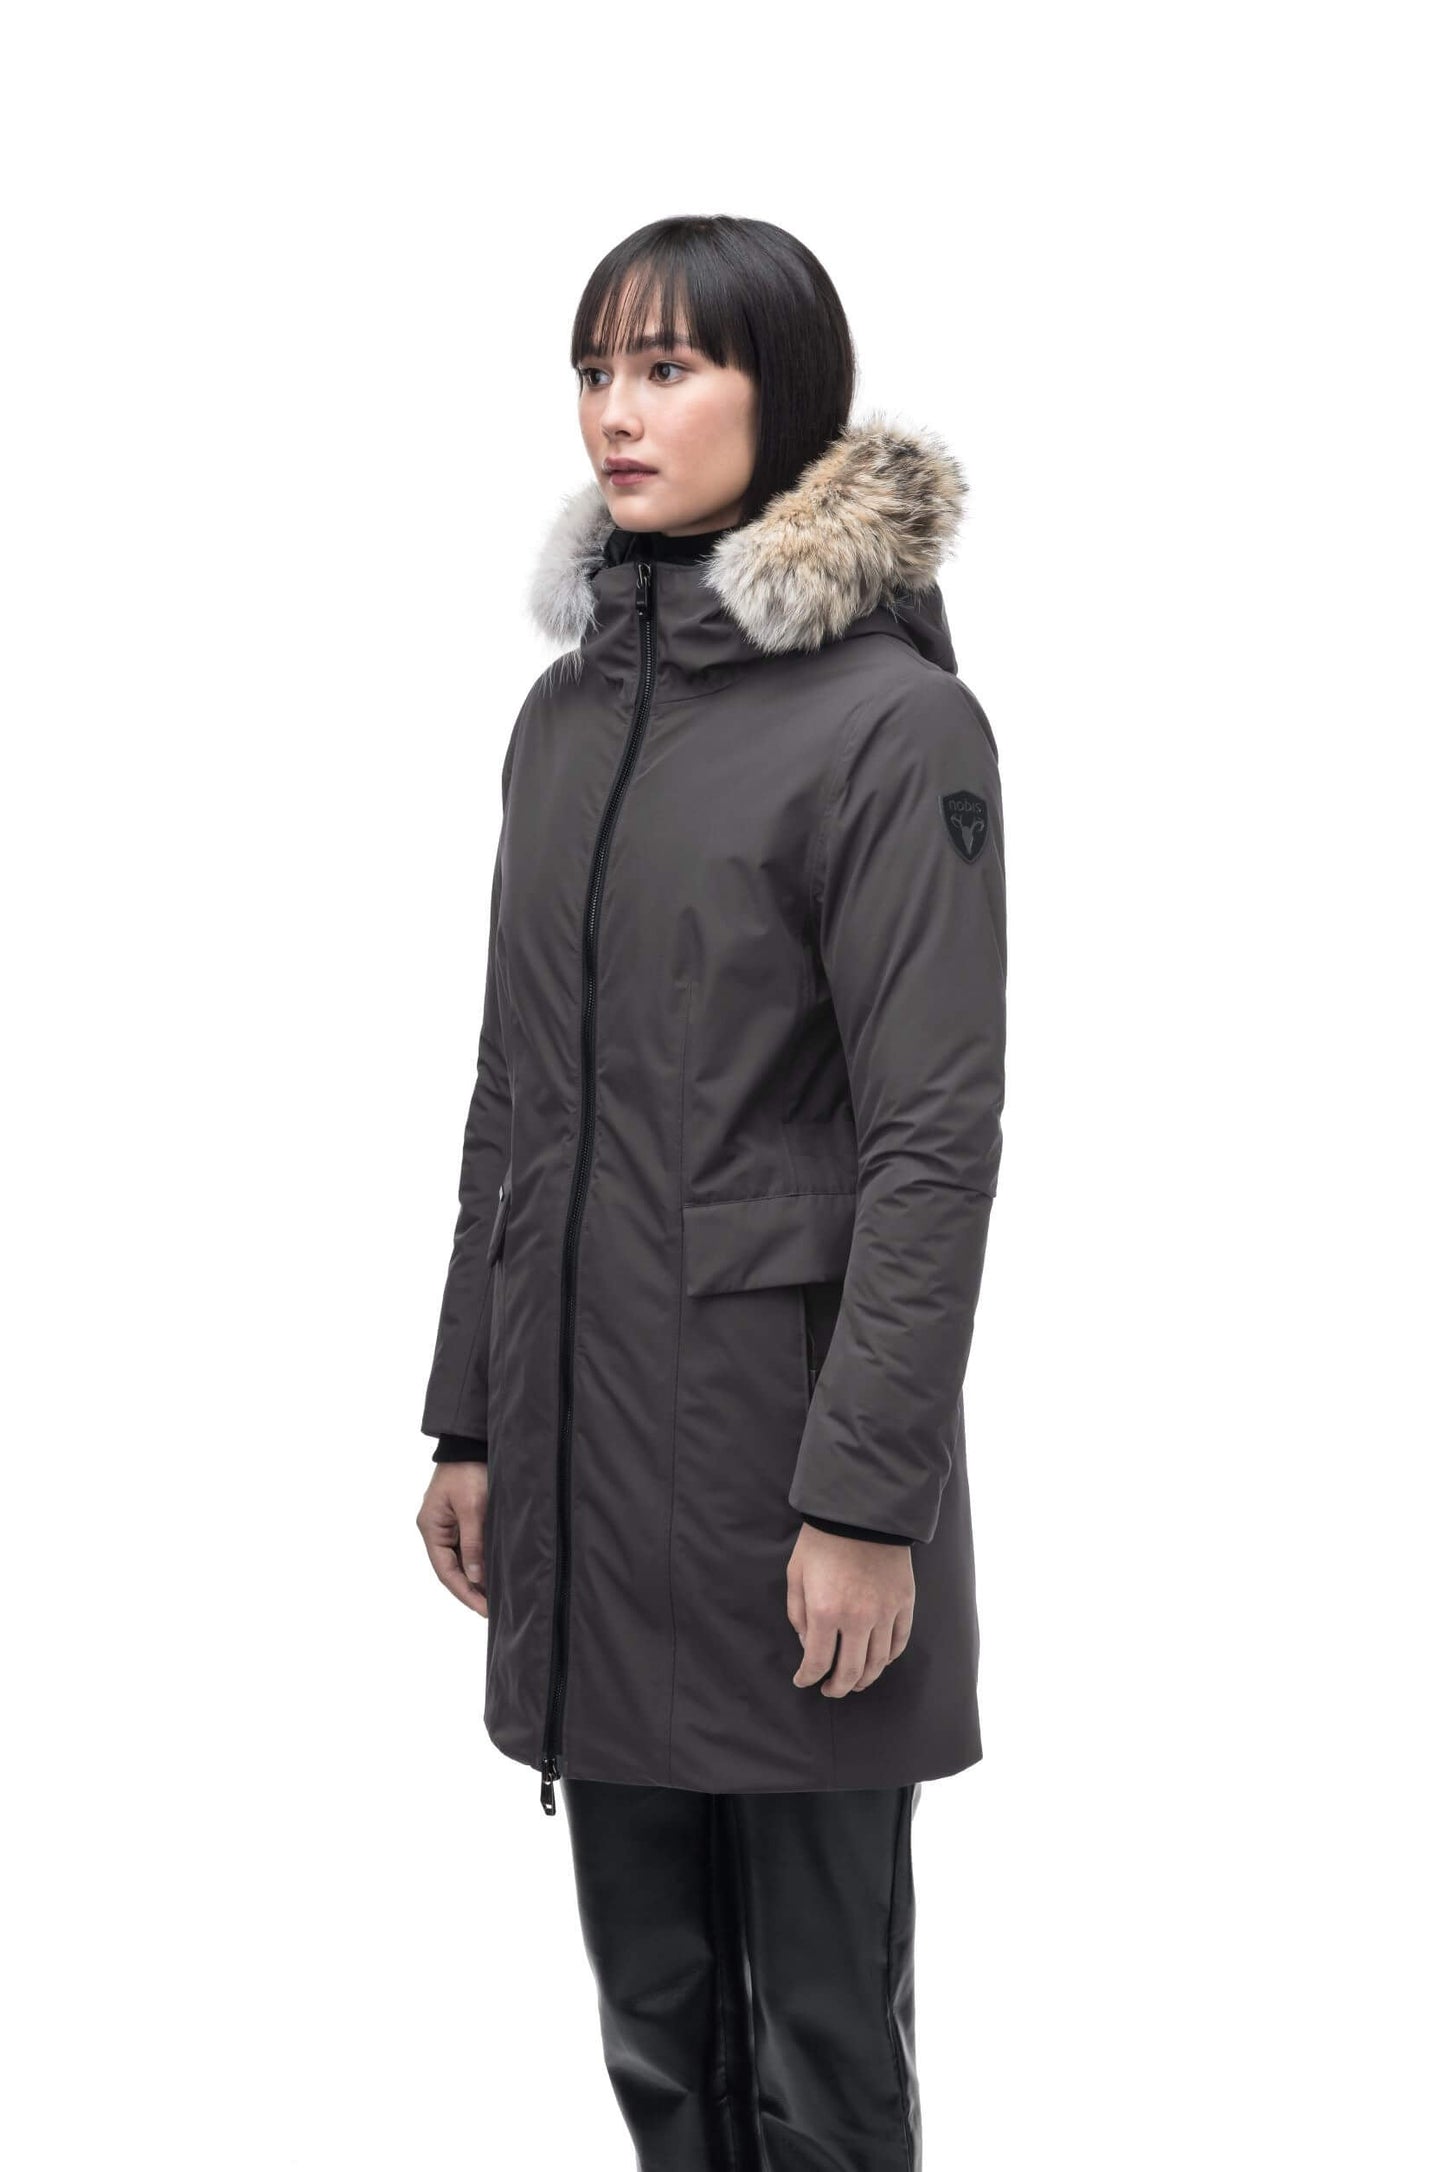 Romeda Ladies Mid Thigh Parka in thigh length, Canadian duck down insulation, non-removable hood with removable fur ruff trim, and two-way front zipper, in Steel Grey